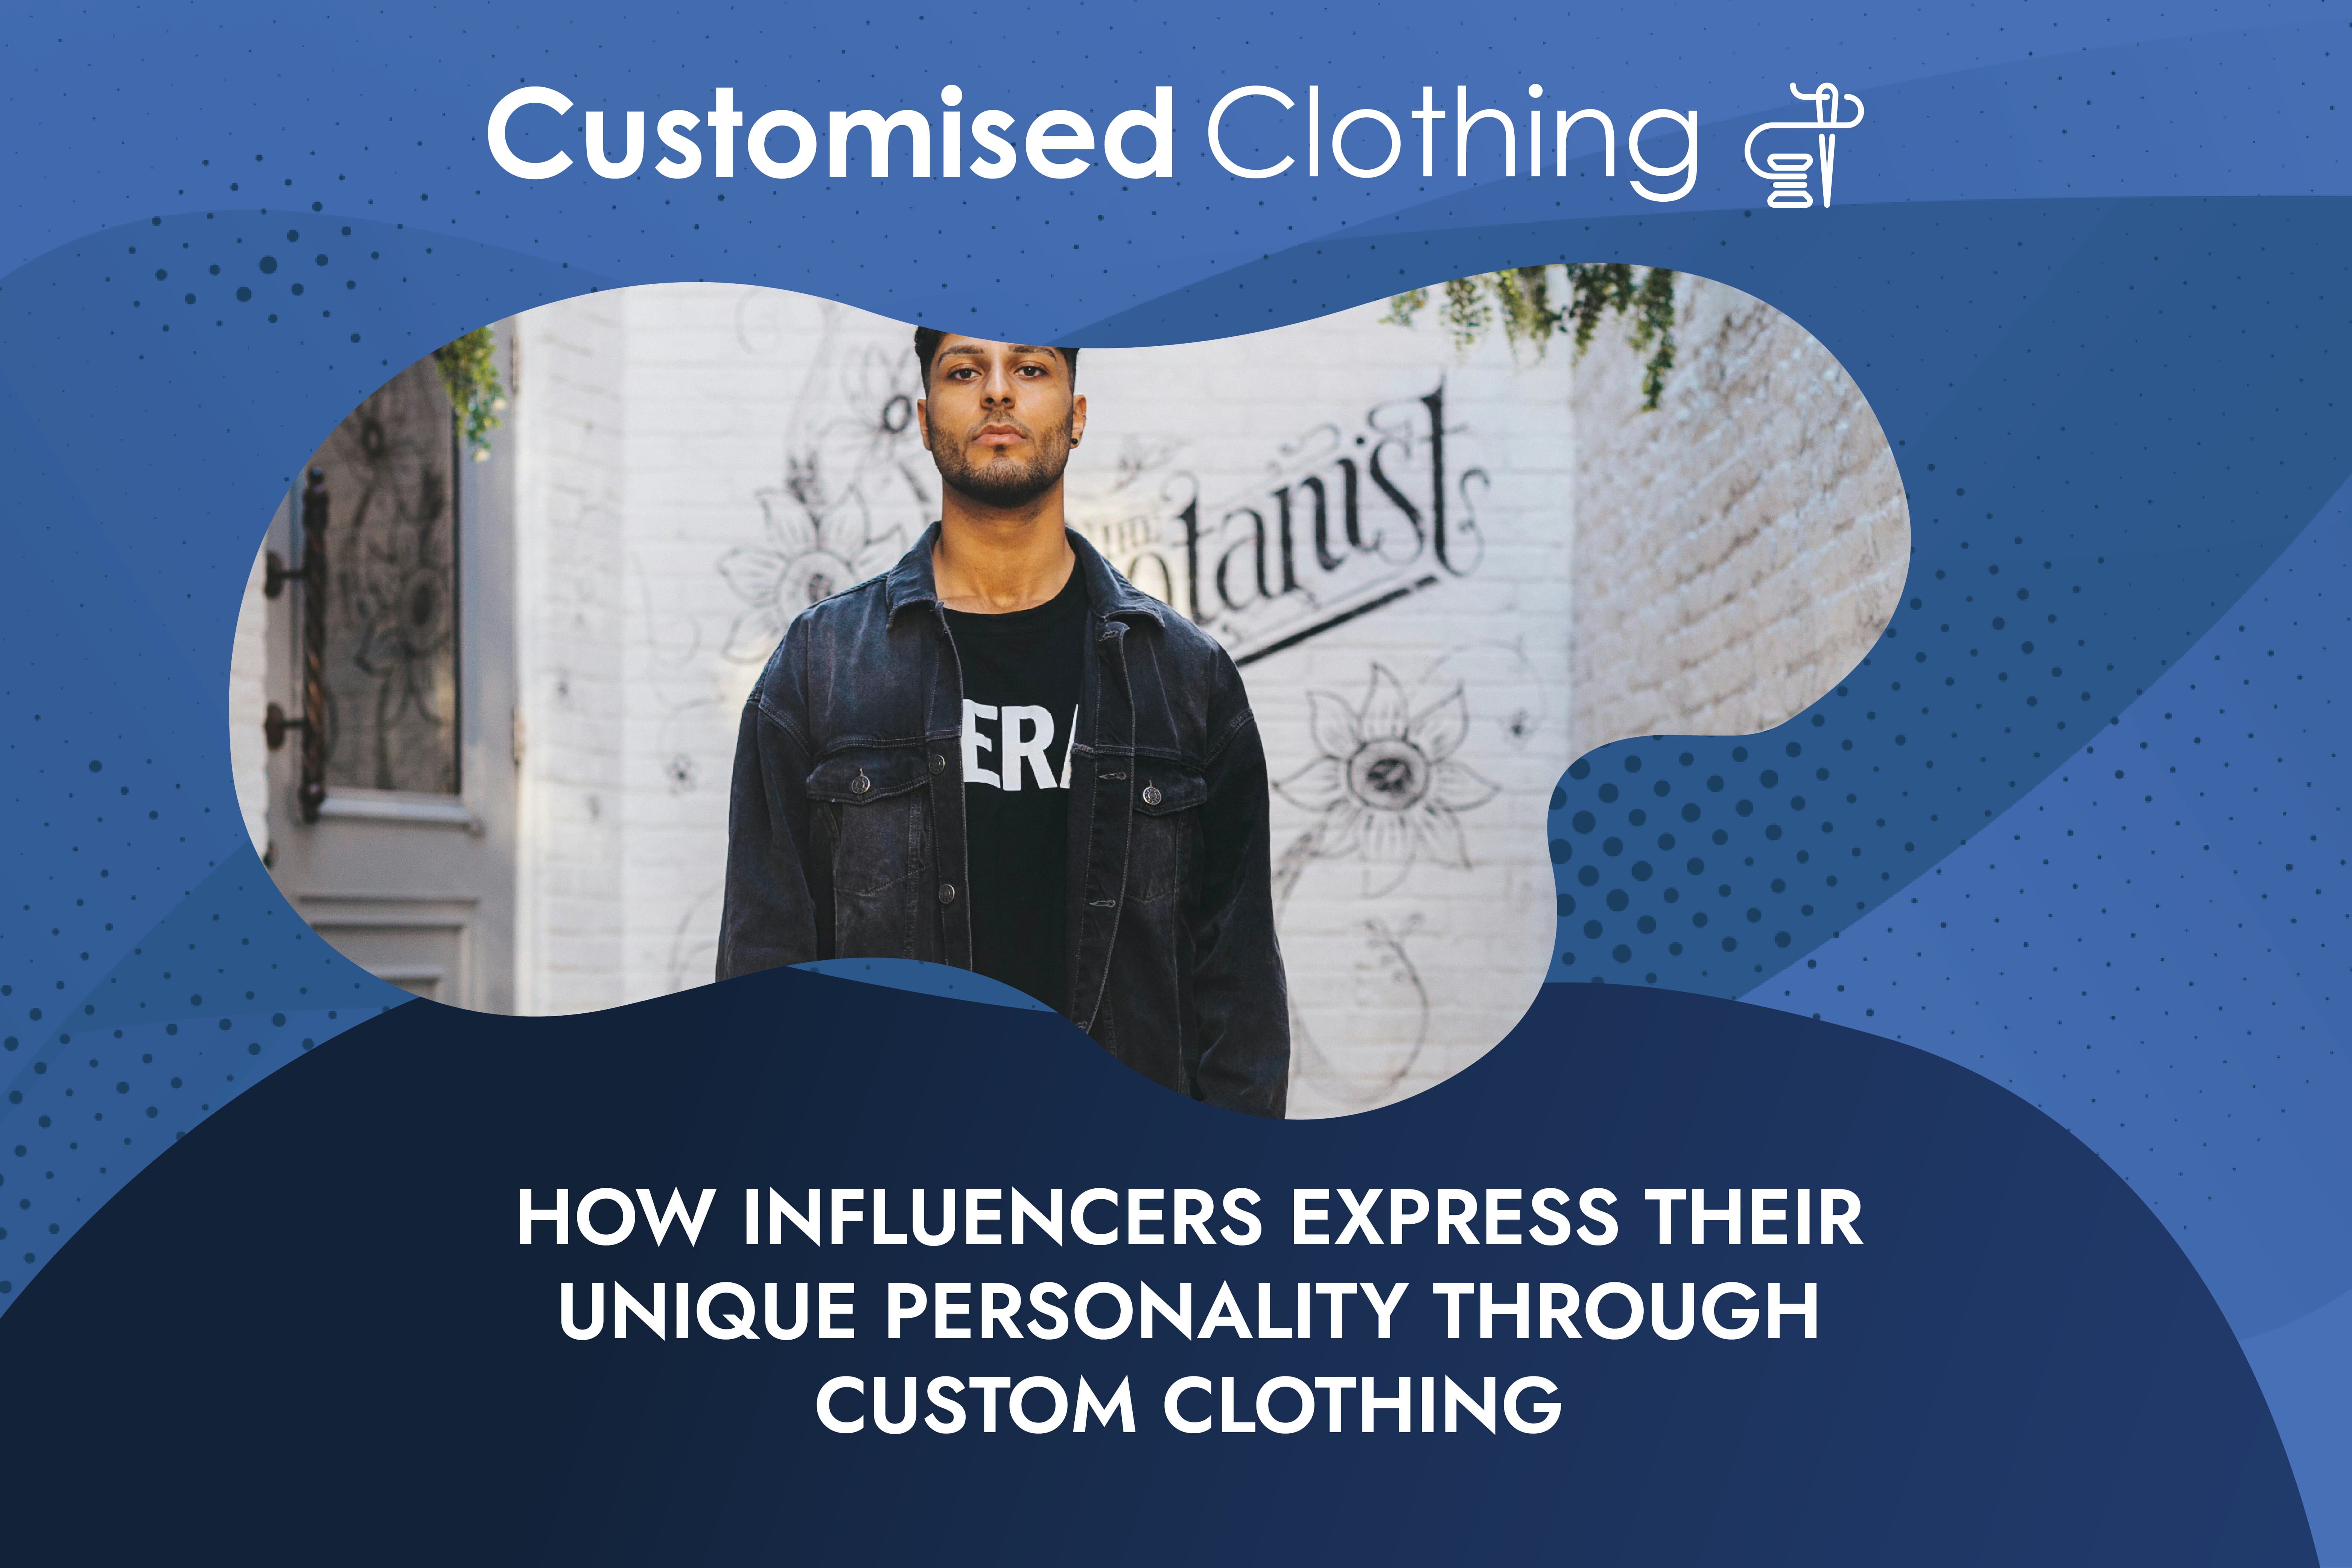 How Influencers Express Their Unique Personality Through Custom Clothing?